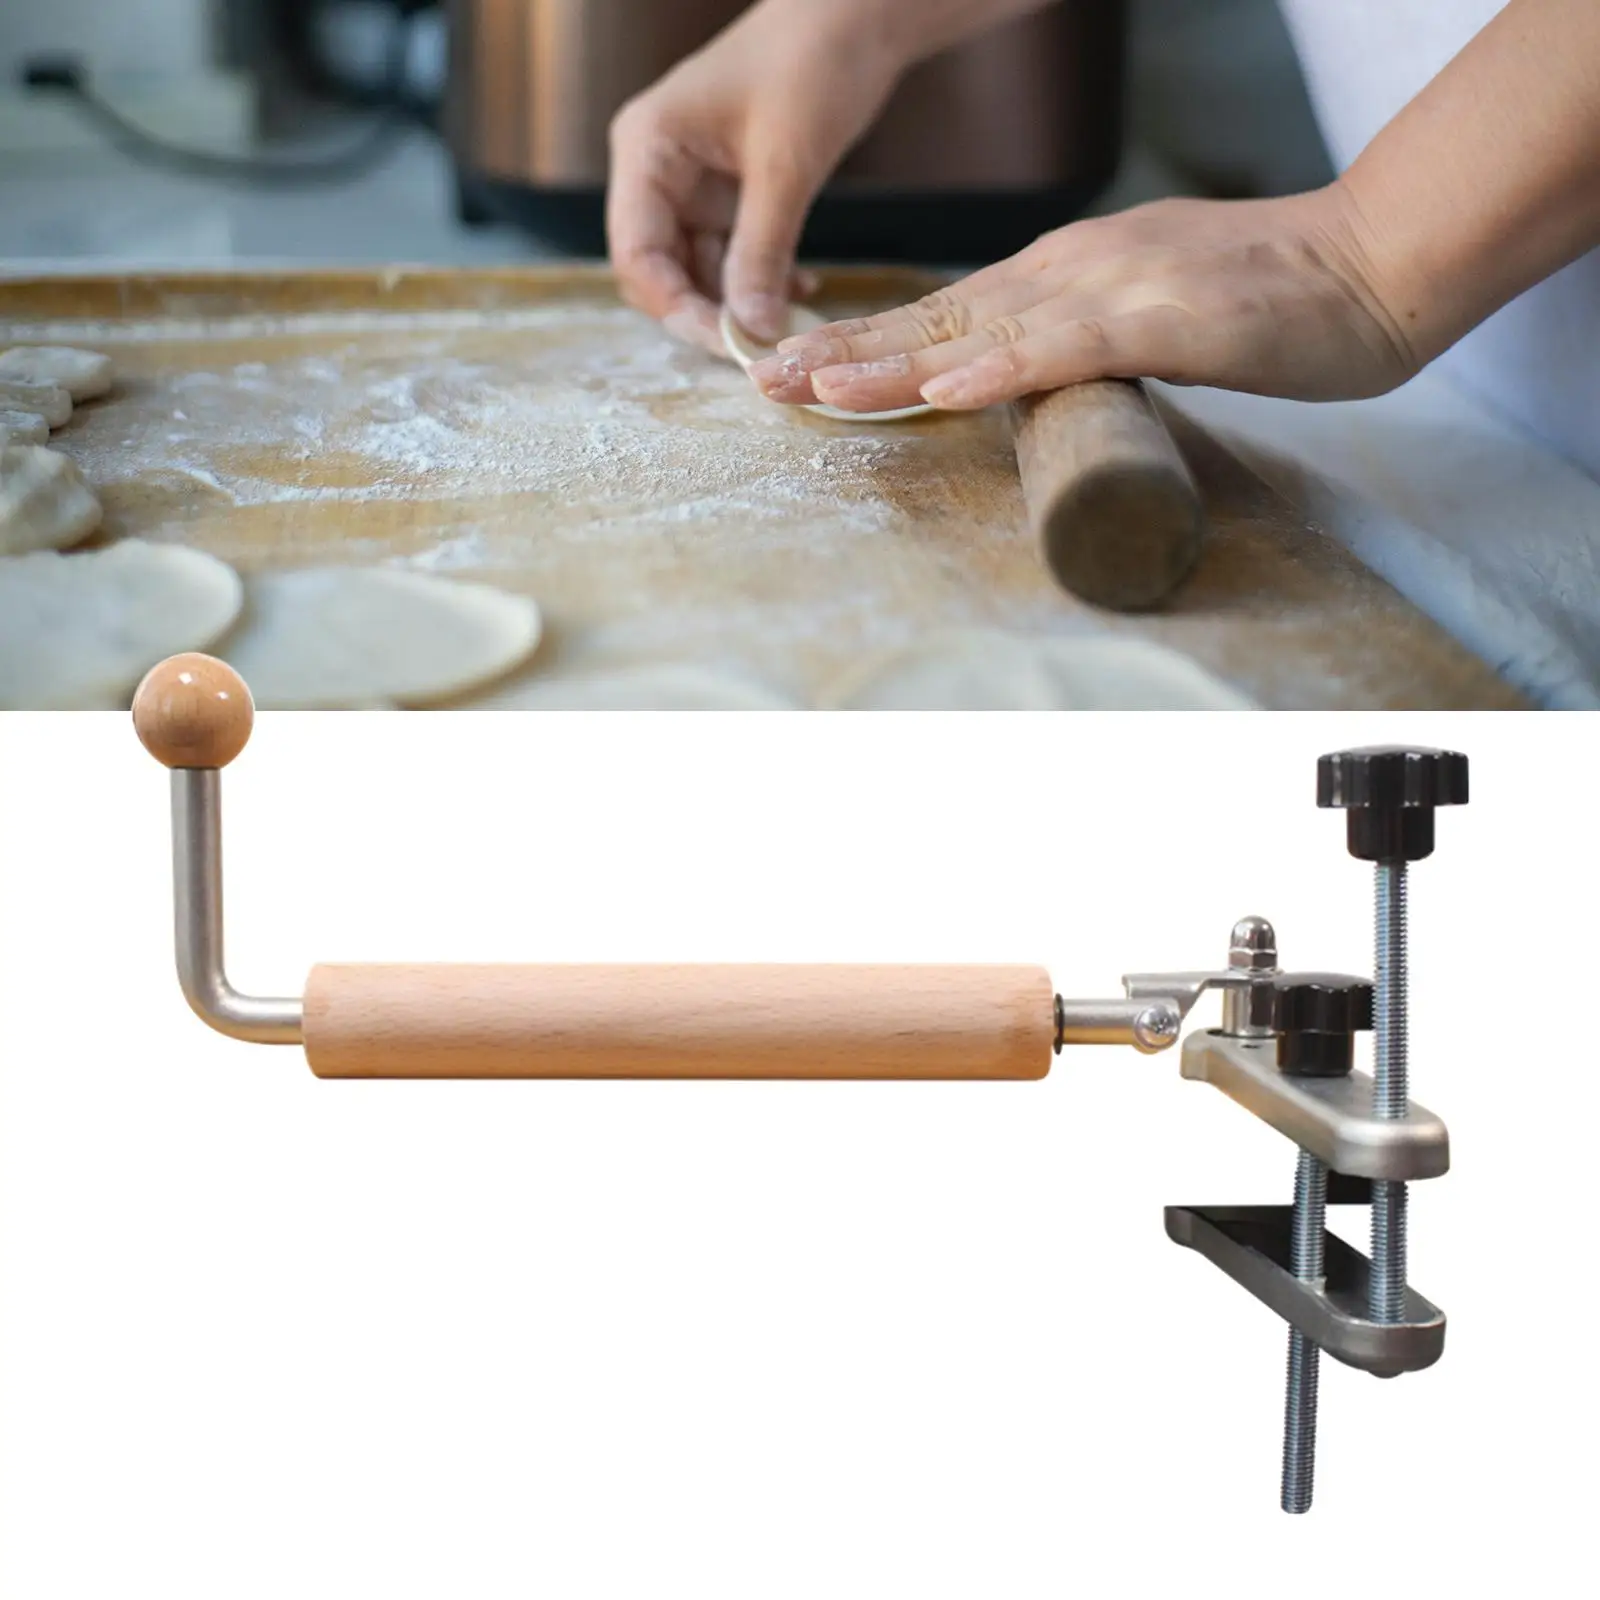 Wooden Rolling Pin Kitchen Utensil Tool Baking Roller for Pizza Bread